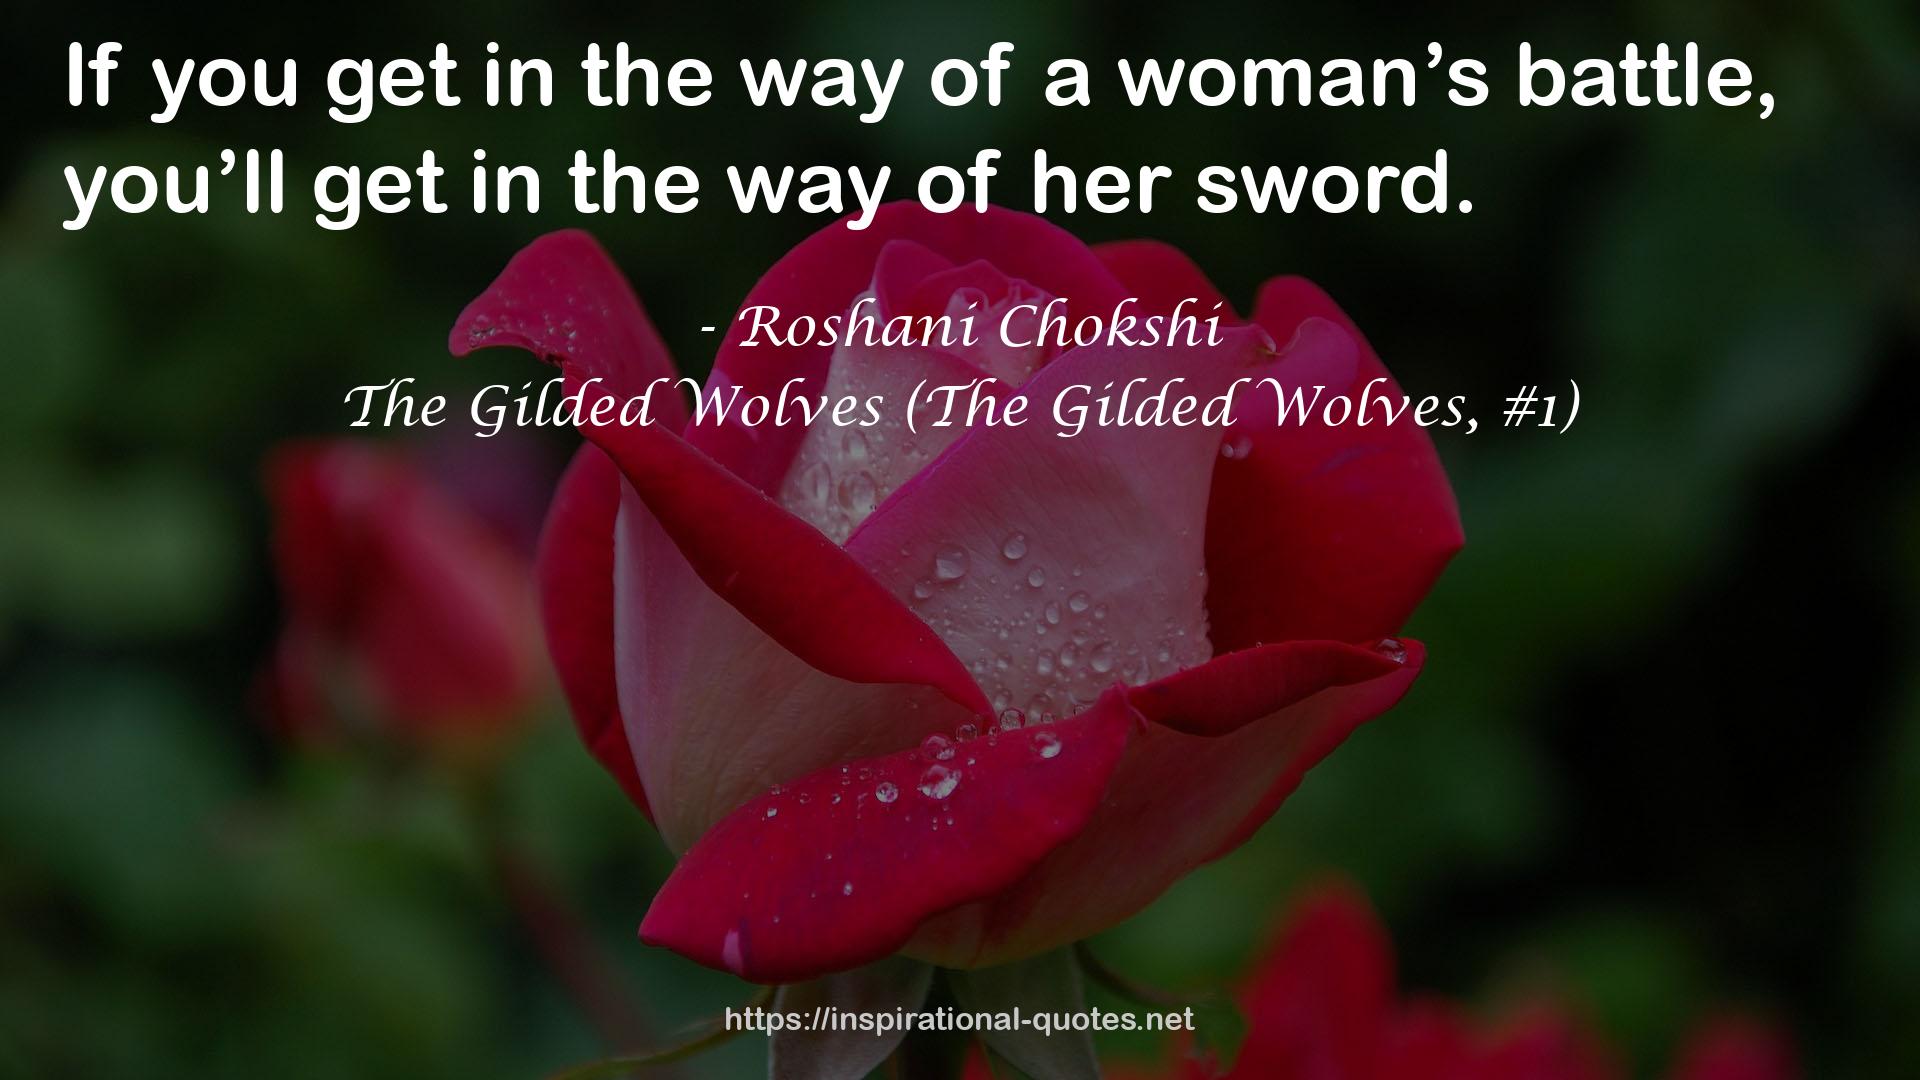 The Gilded Wolves (The Gilded Wolves, #1) QUOTES